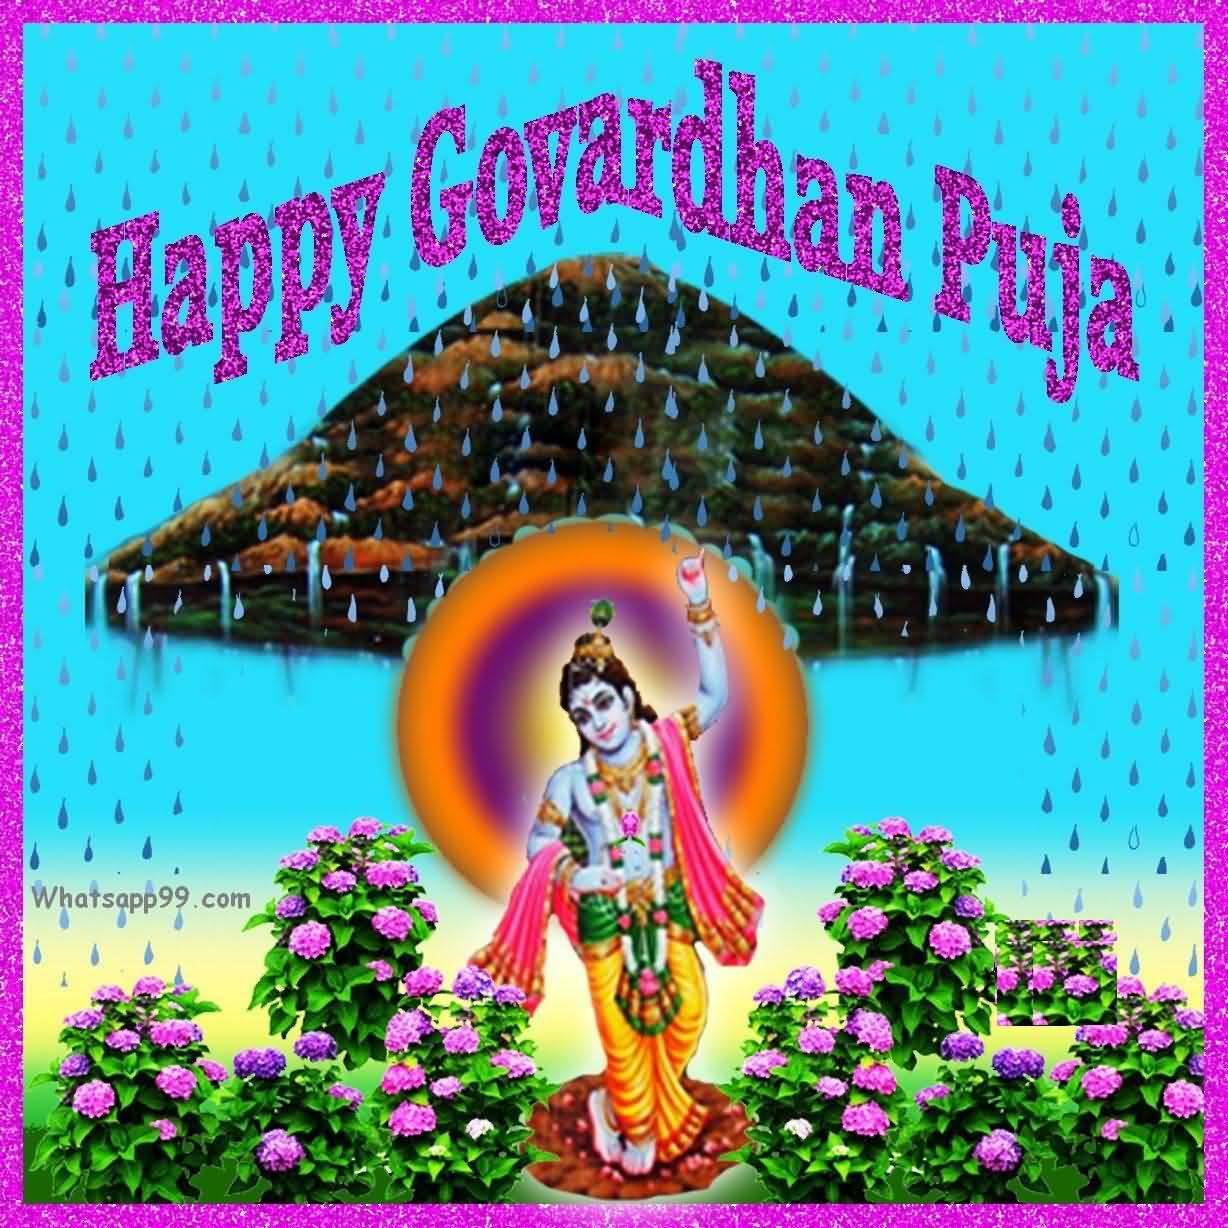 Happy Govardhan Puja Wishes Graphic - Govardhan Puja Images Download - HD Wallpaper 